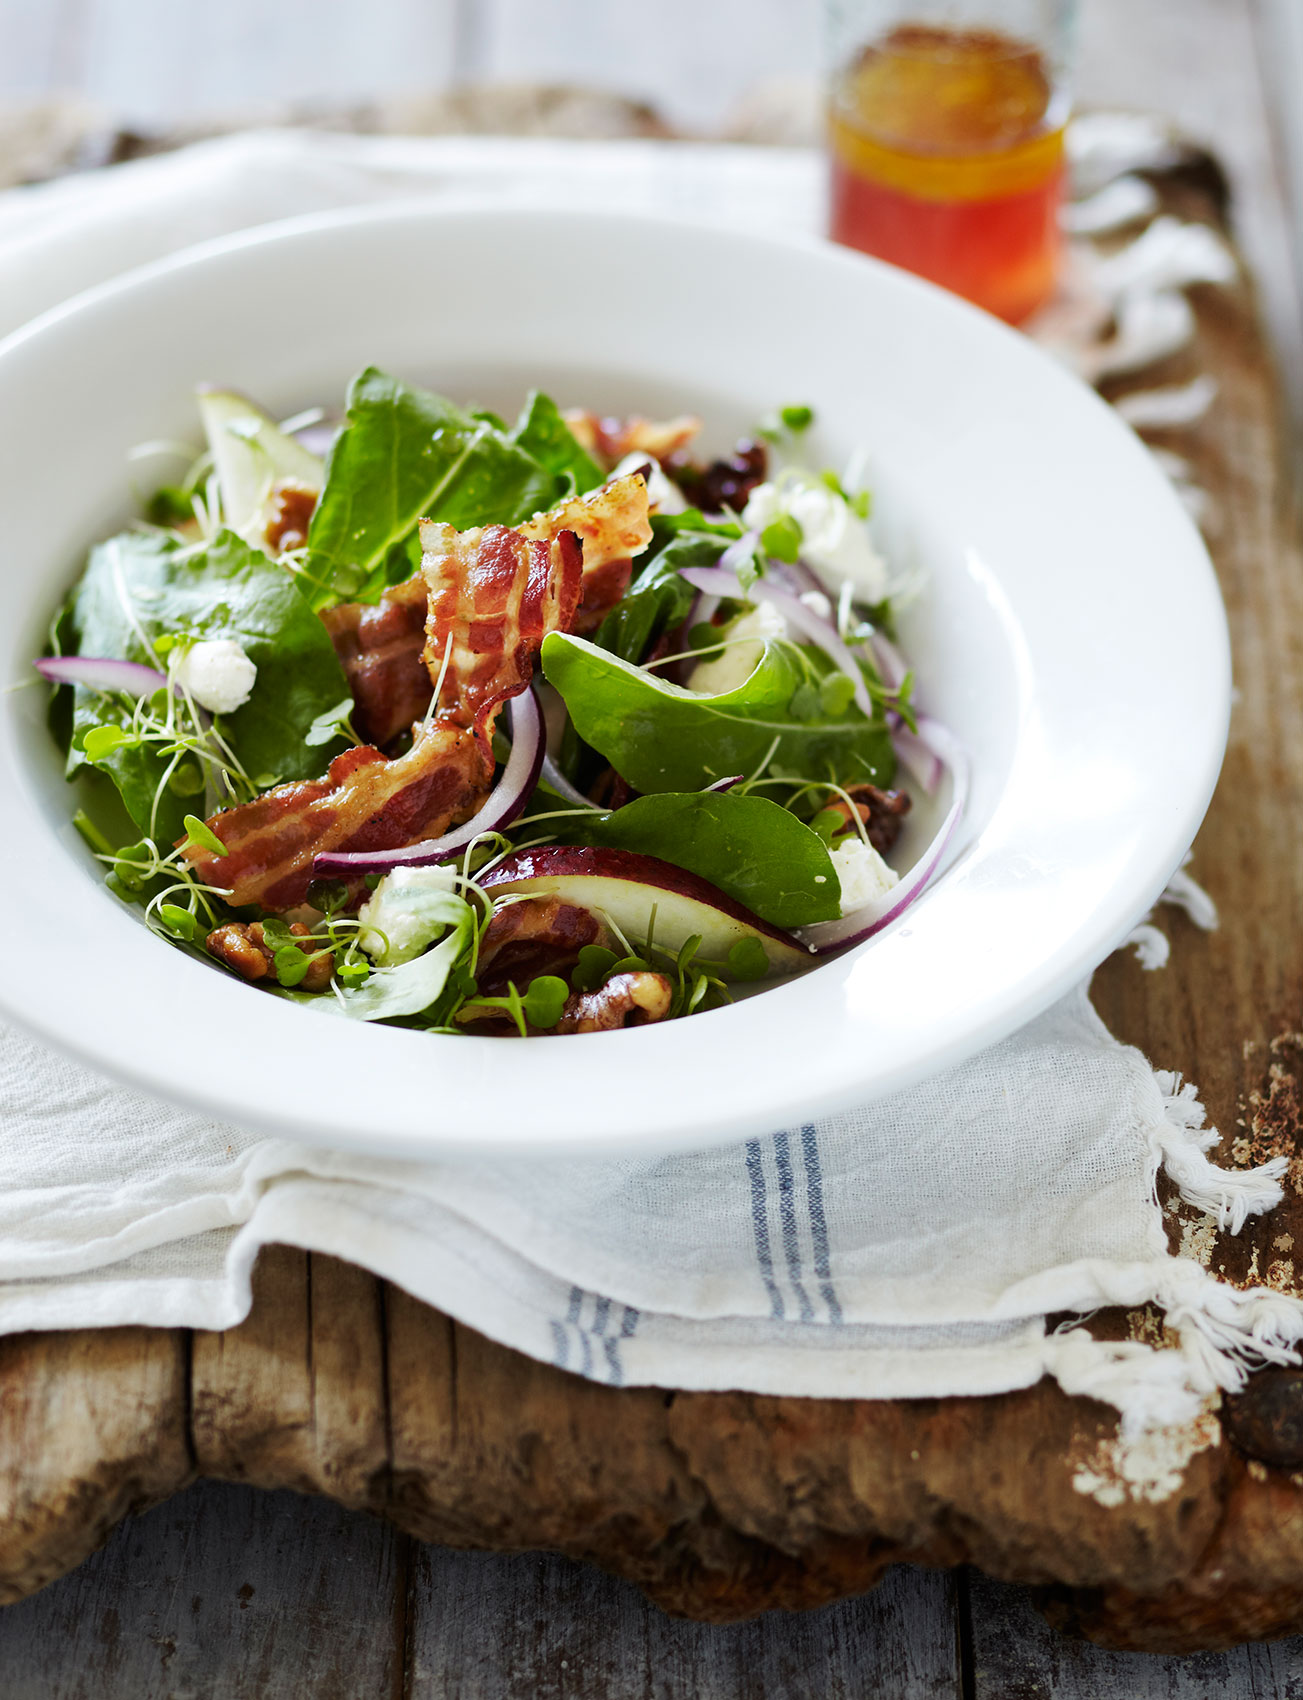 Simple Salads • Crispy Bacon Rocket Salad with Purple Onion & Sprouts • Cookbook & Editorial Food Photography